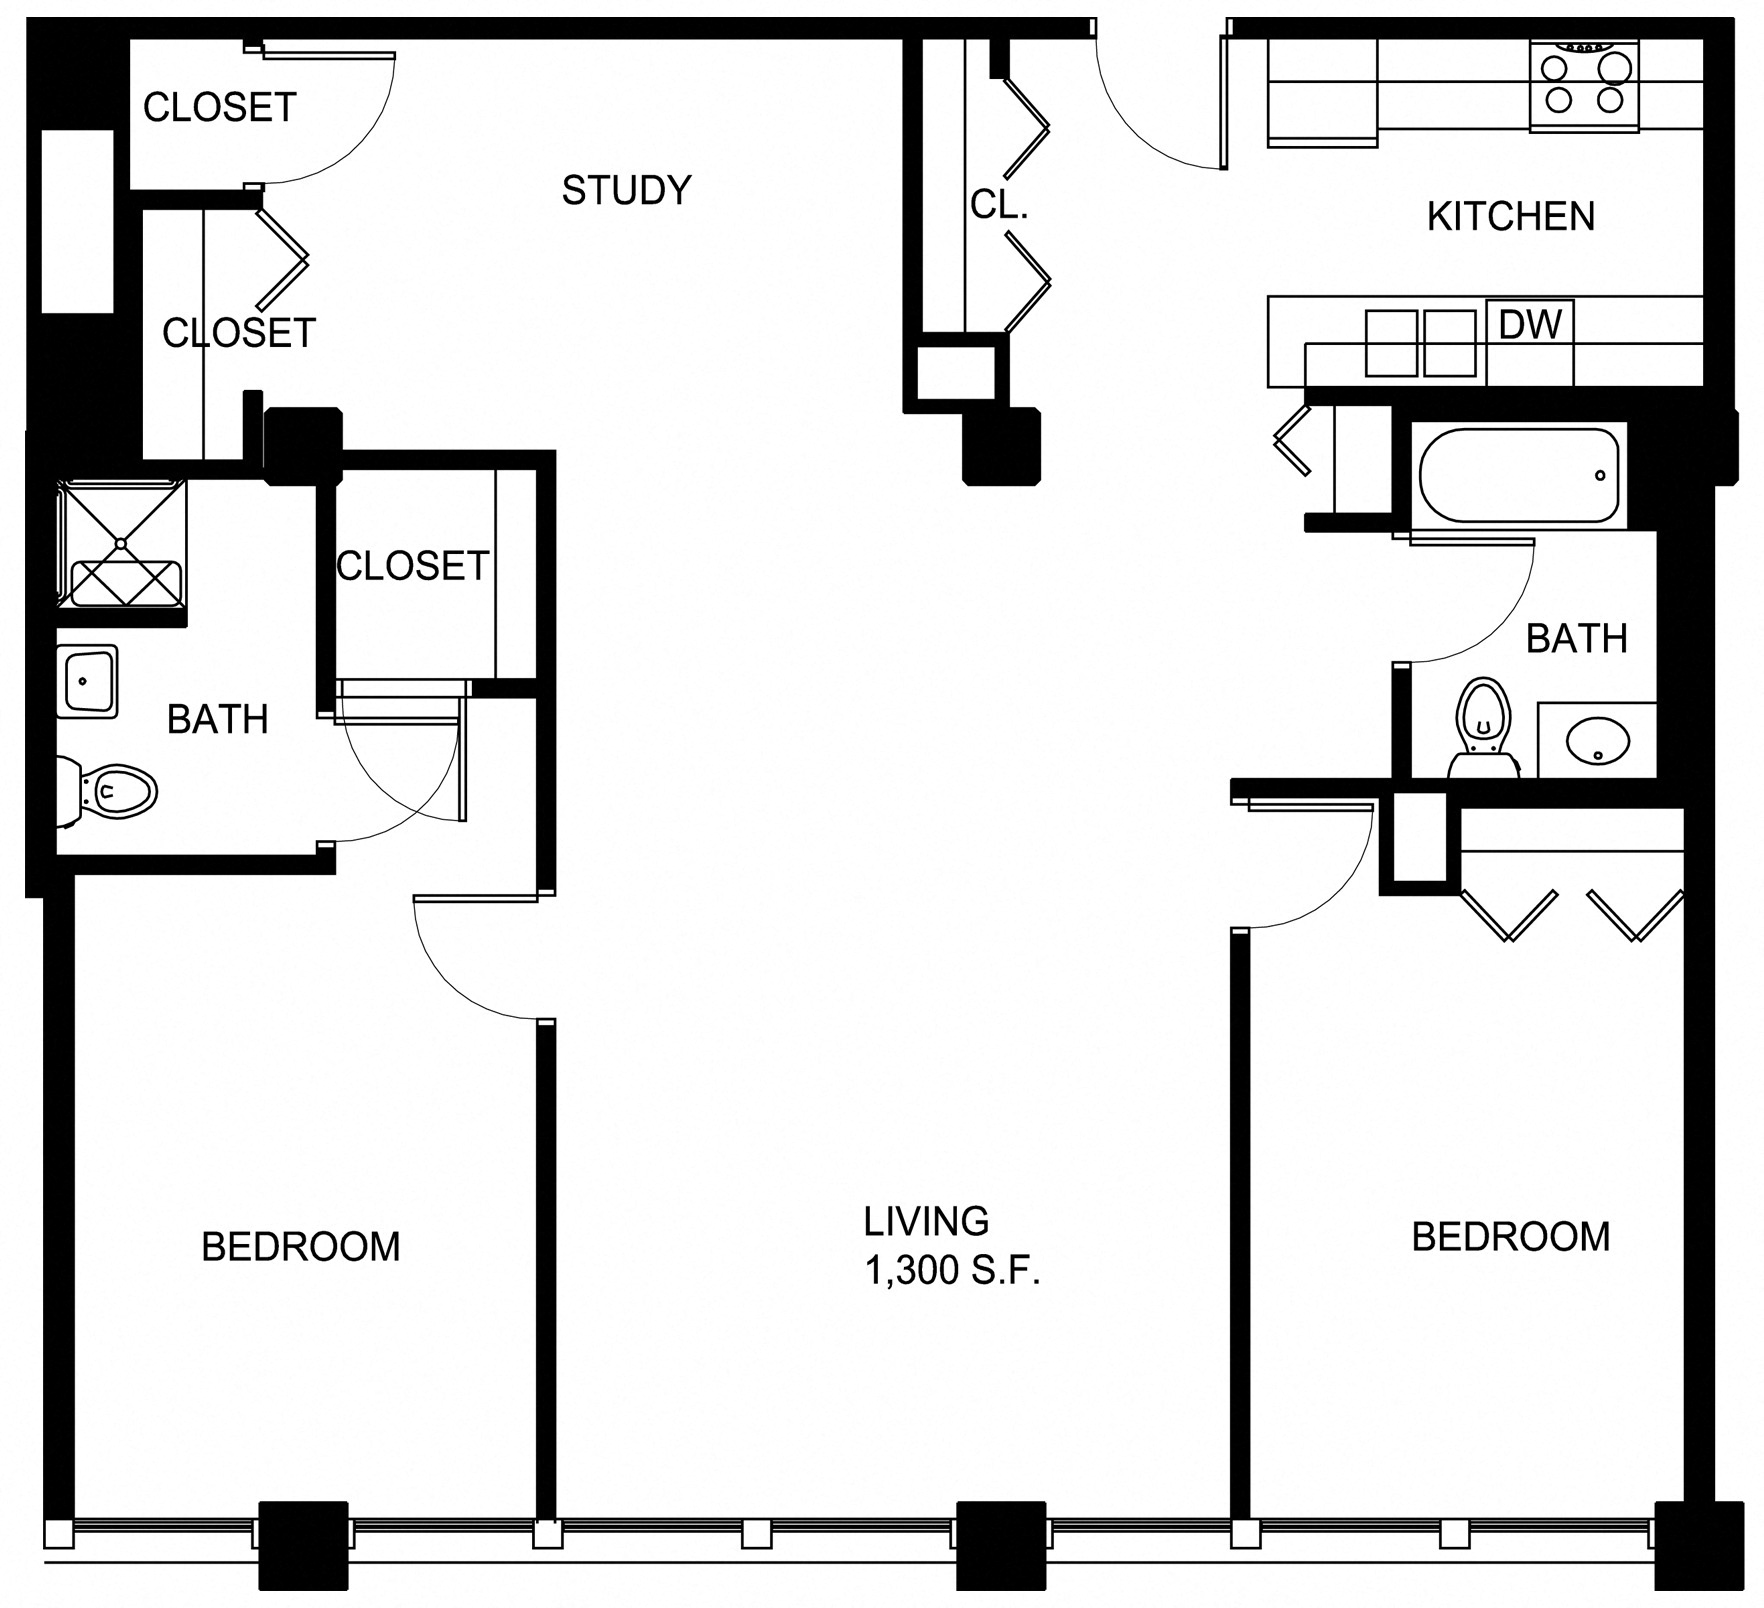 Floorplan for Apartment #P613, 2 bedroom unit at Halstead Providence